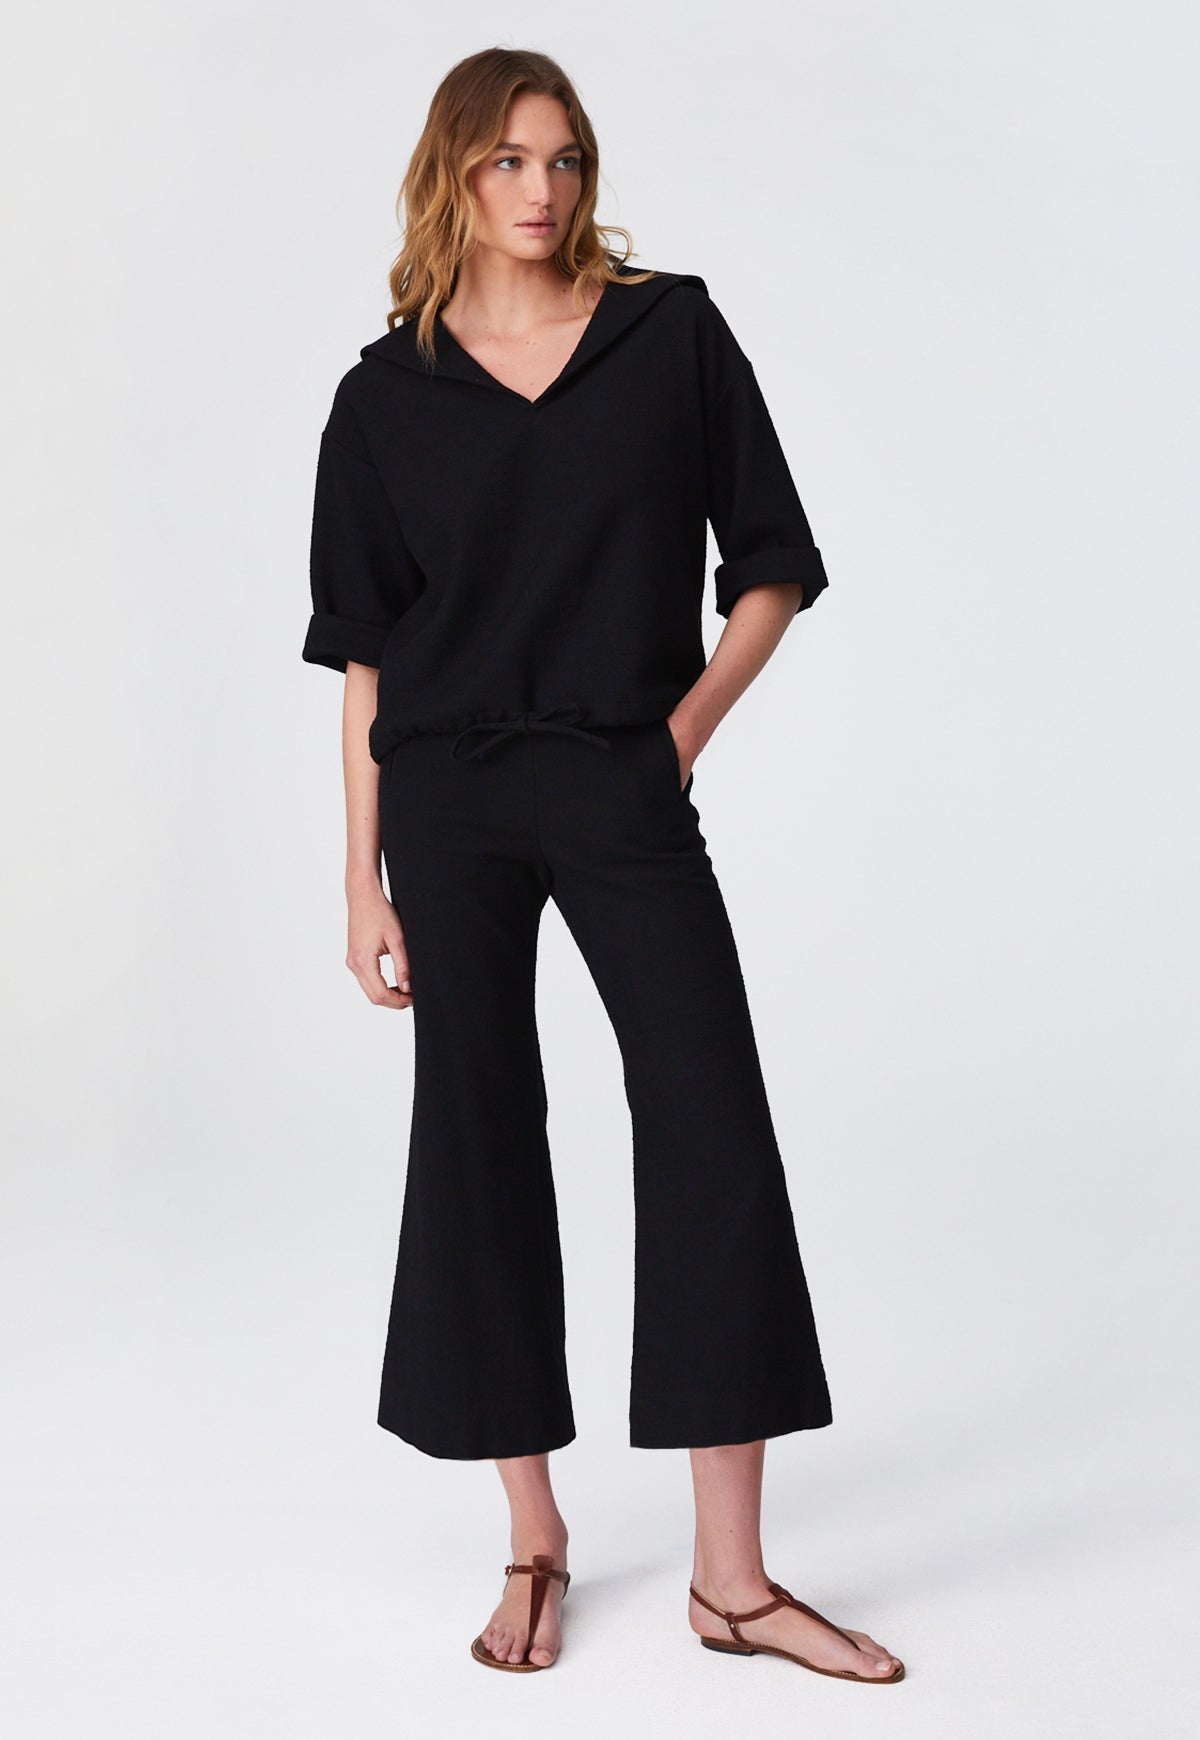 THE FLARE TROUSER in BLACK TEXTURED COTTON